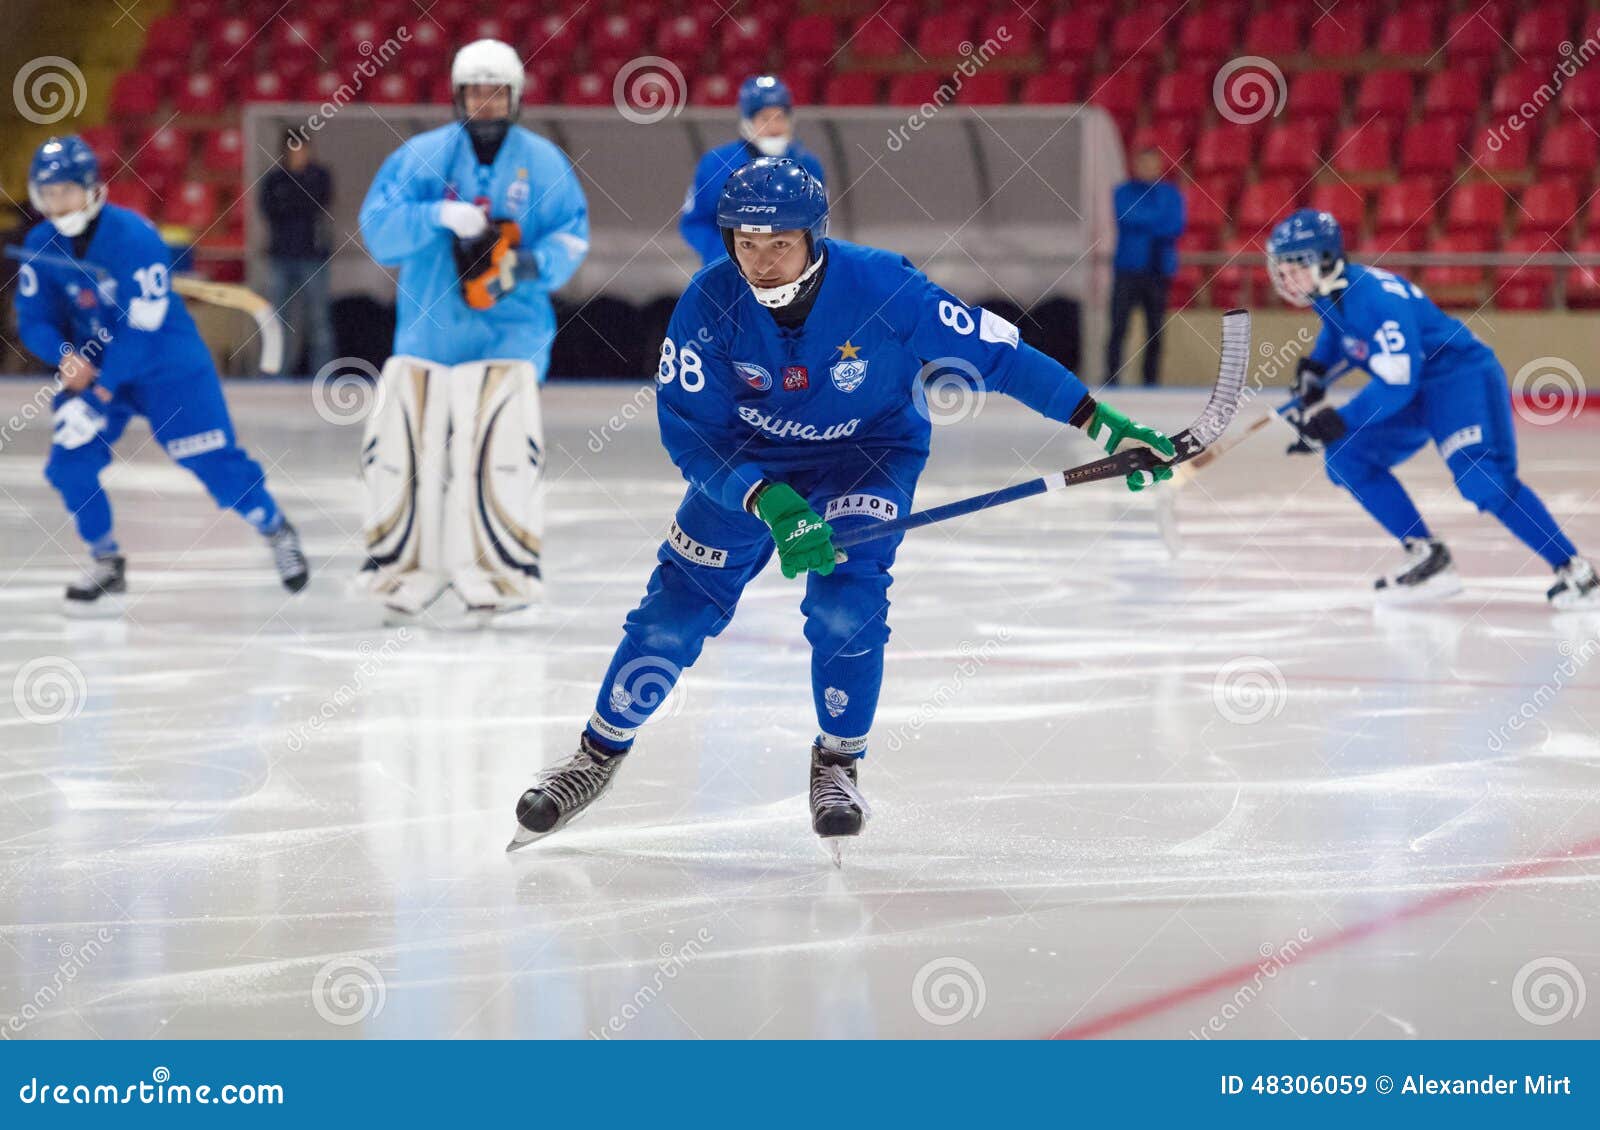 MOSCOW - DECEMBER 12, 2014: Ivanushkin Eugeny (88) in action just before the Russian bandy league game Dynamo Moscow vs SKA Neftyanik in sport palace Krilatskoe, Moscow, Russia. Dynamo won 9:1